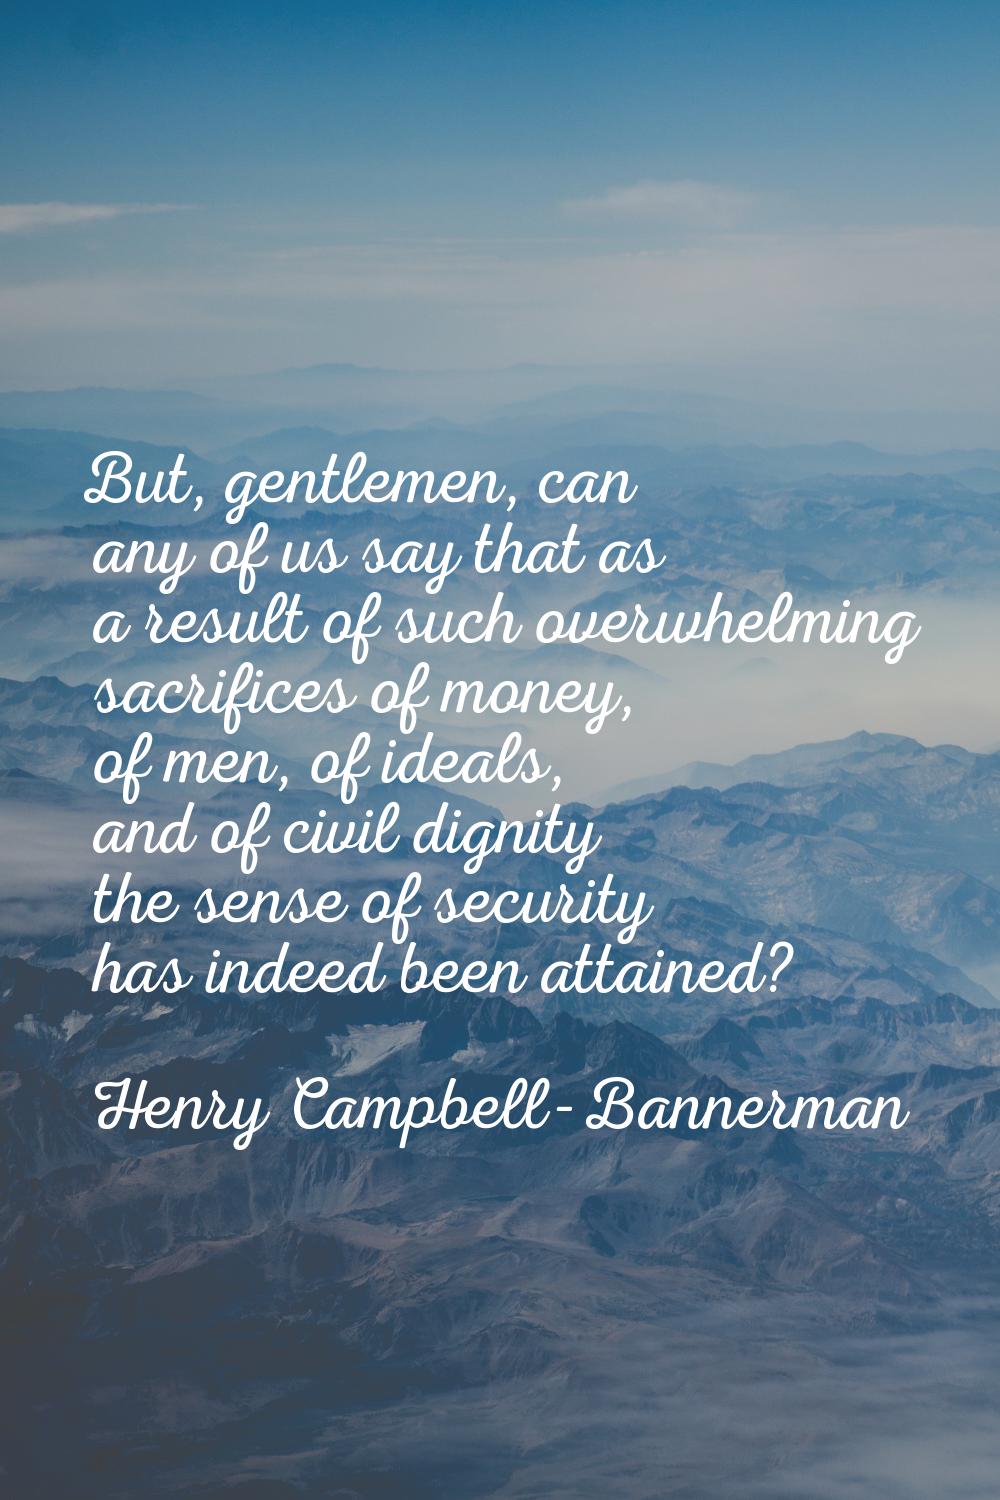 But, gentlemen, can any of us say that as a result of such overwhelming sacrifices of money, of men